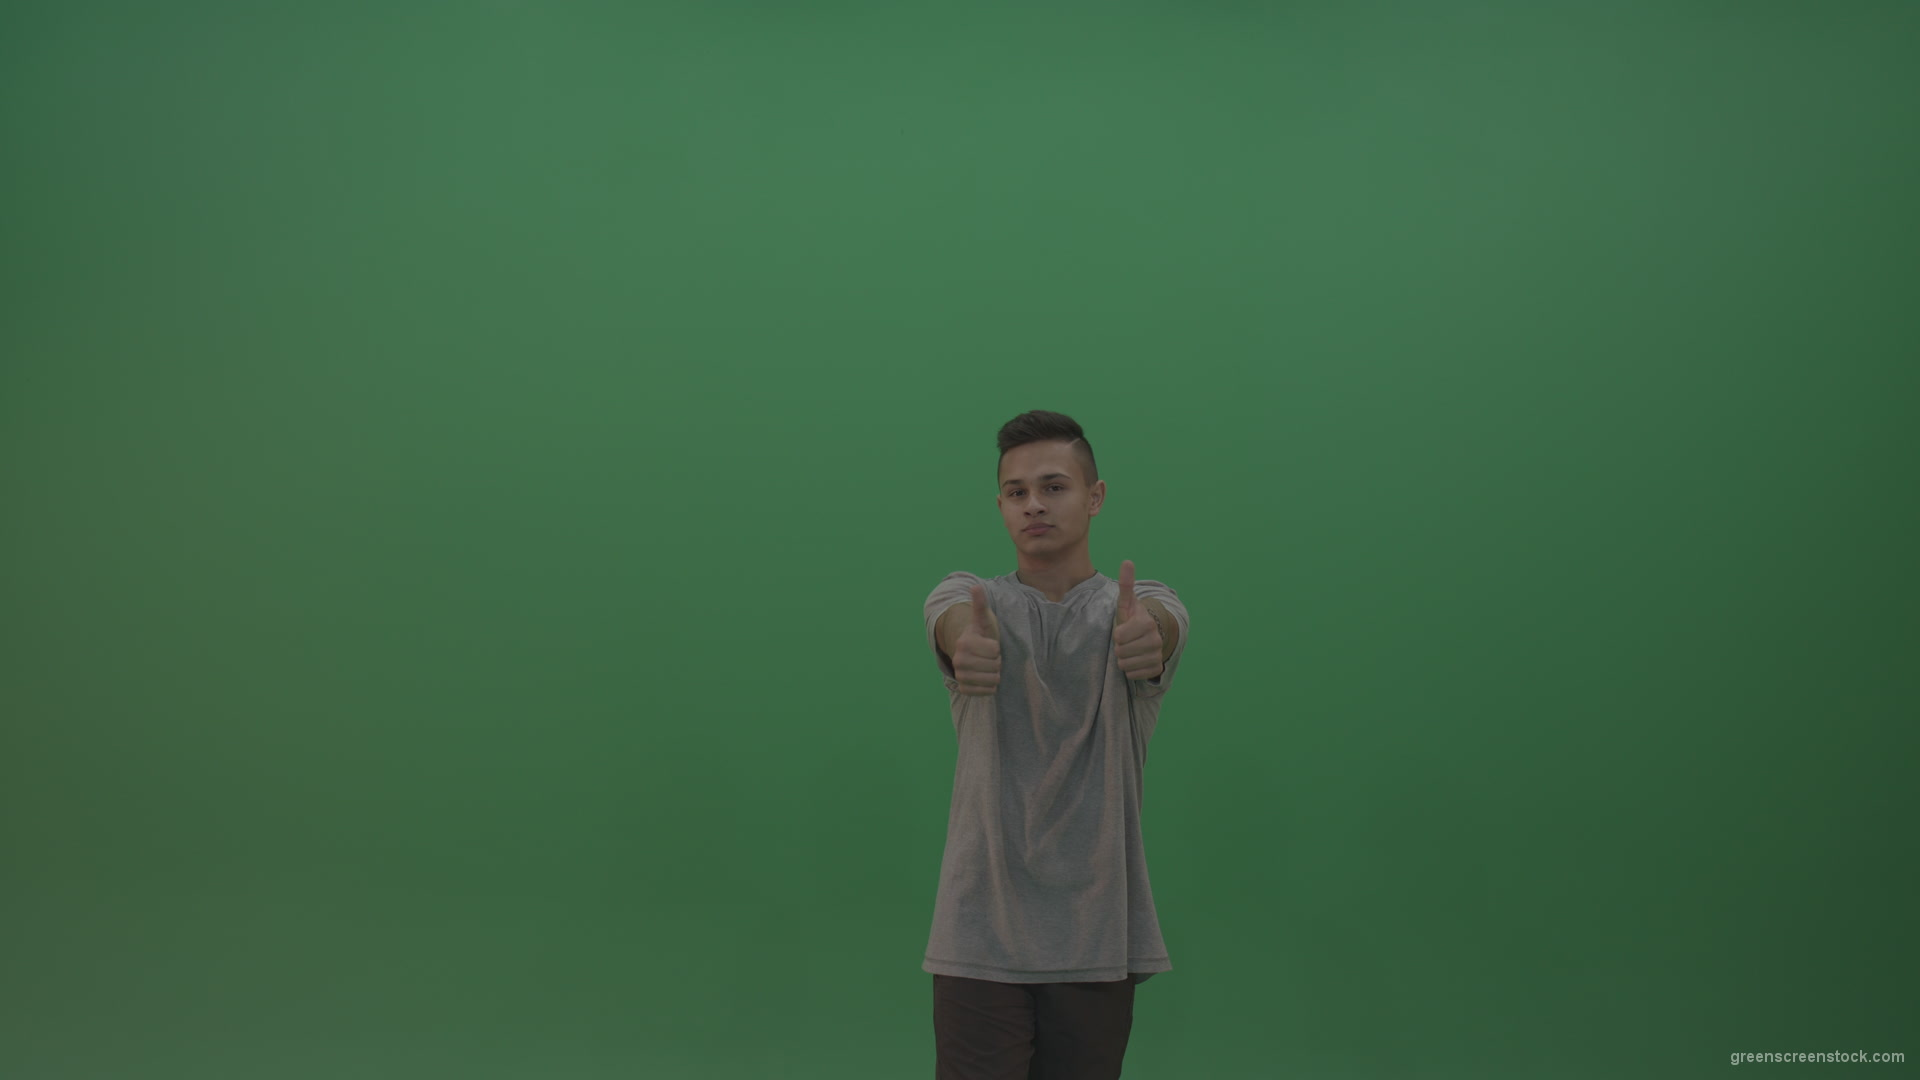 Boy-in-grey-wear-expresses-approval-by-giving-thumbs-up-over-green-screen-background_008 Green Screen Stock